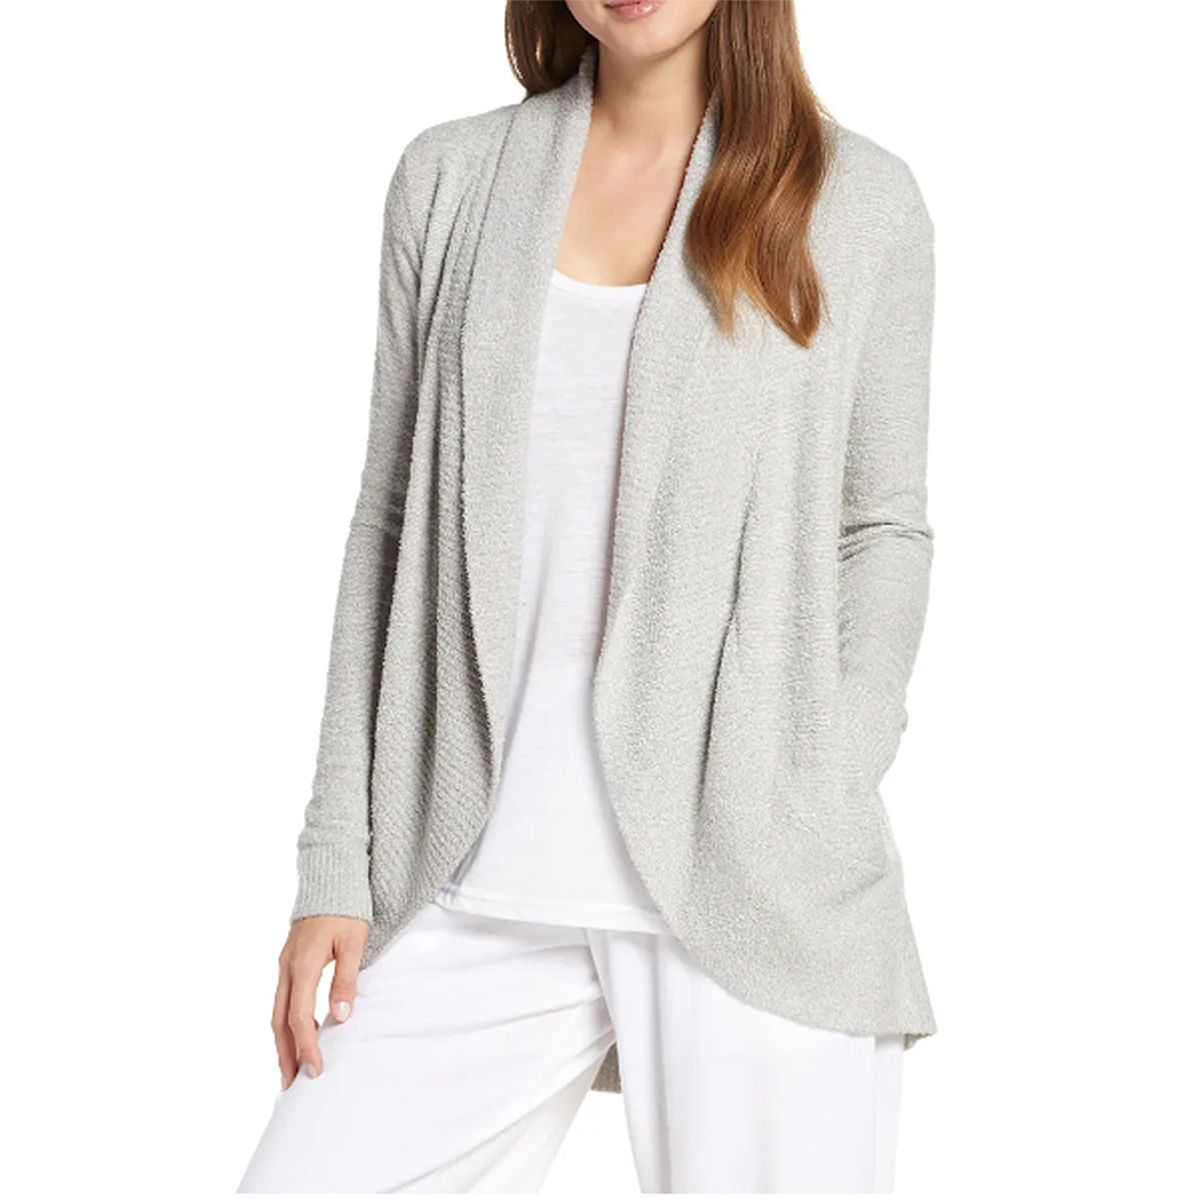 Nordstrom-cyber-deal-barefoot-dreams-cardigan